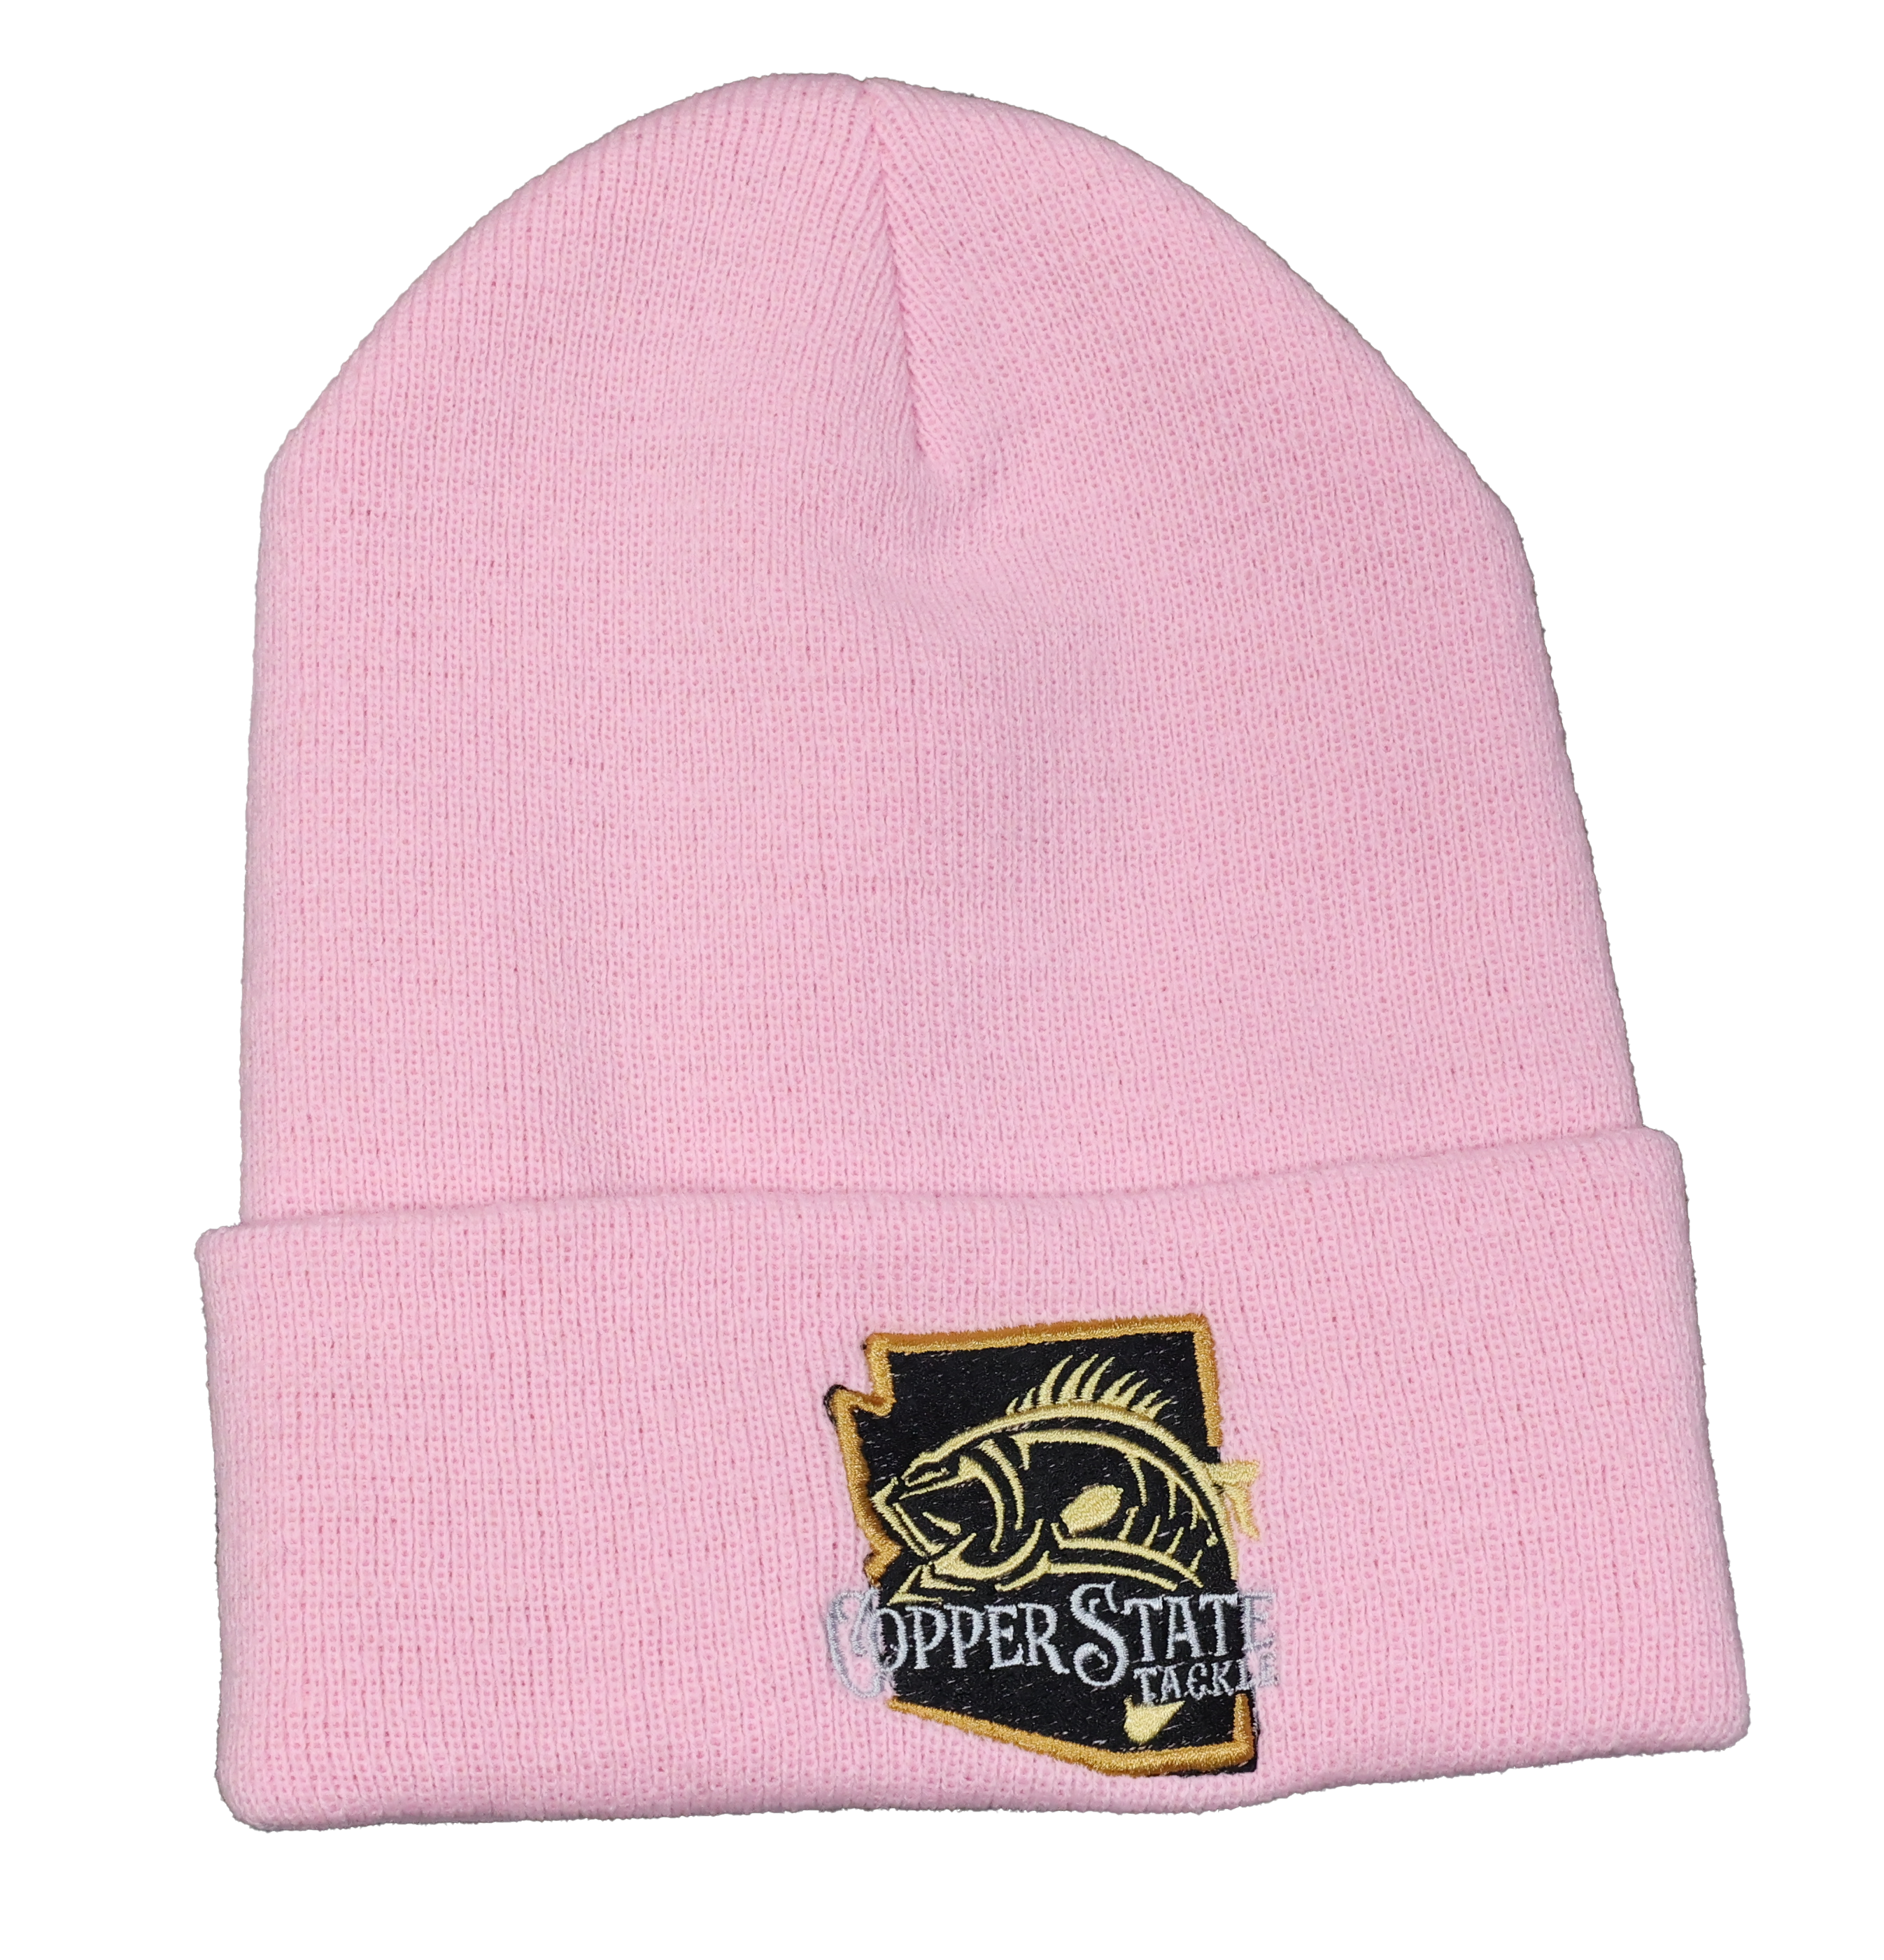 COPPERSTATE TACKLE BEANIE HAT